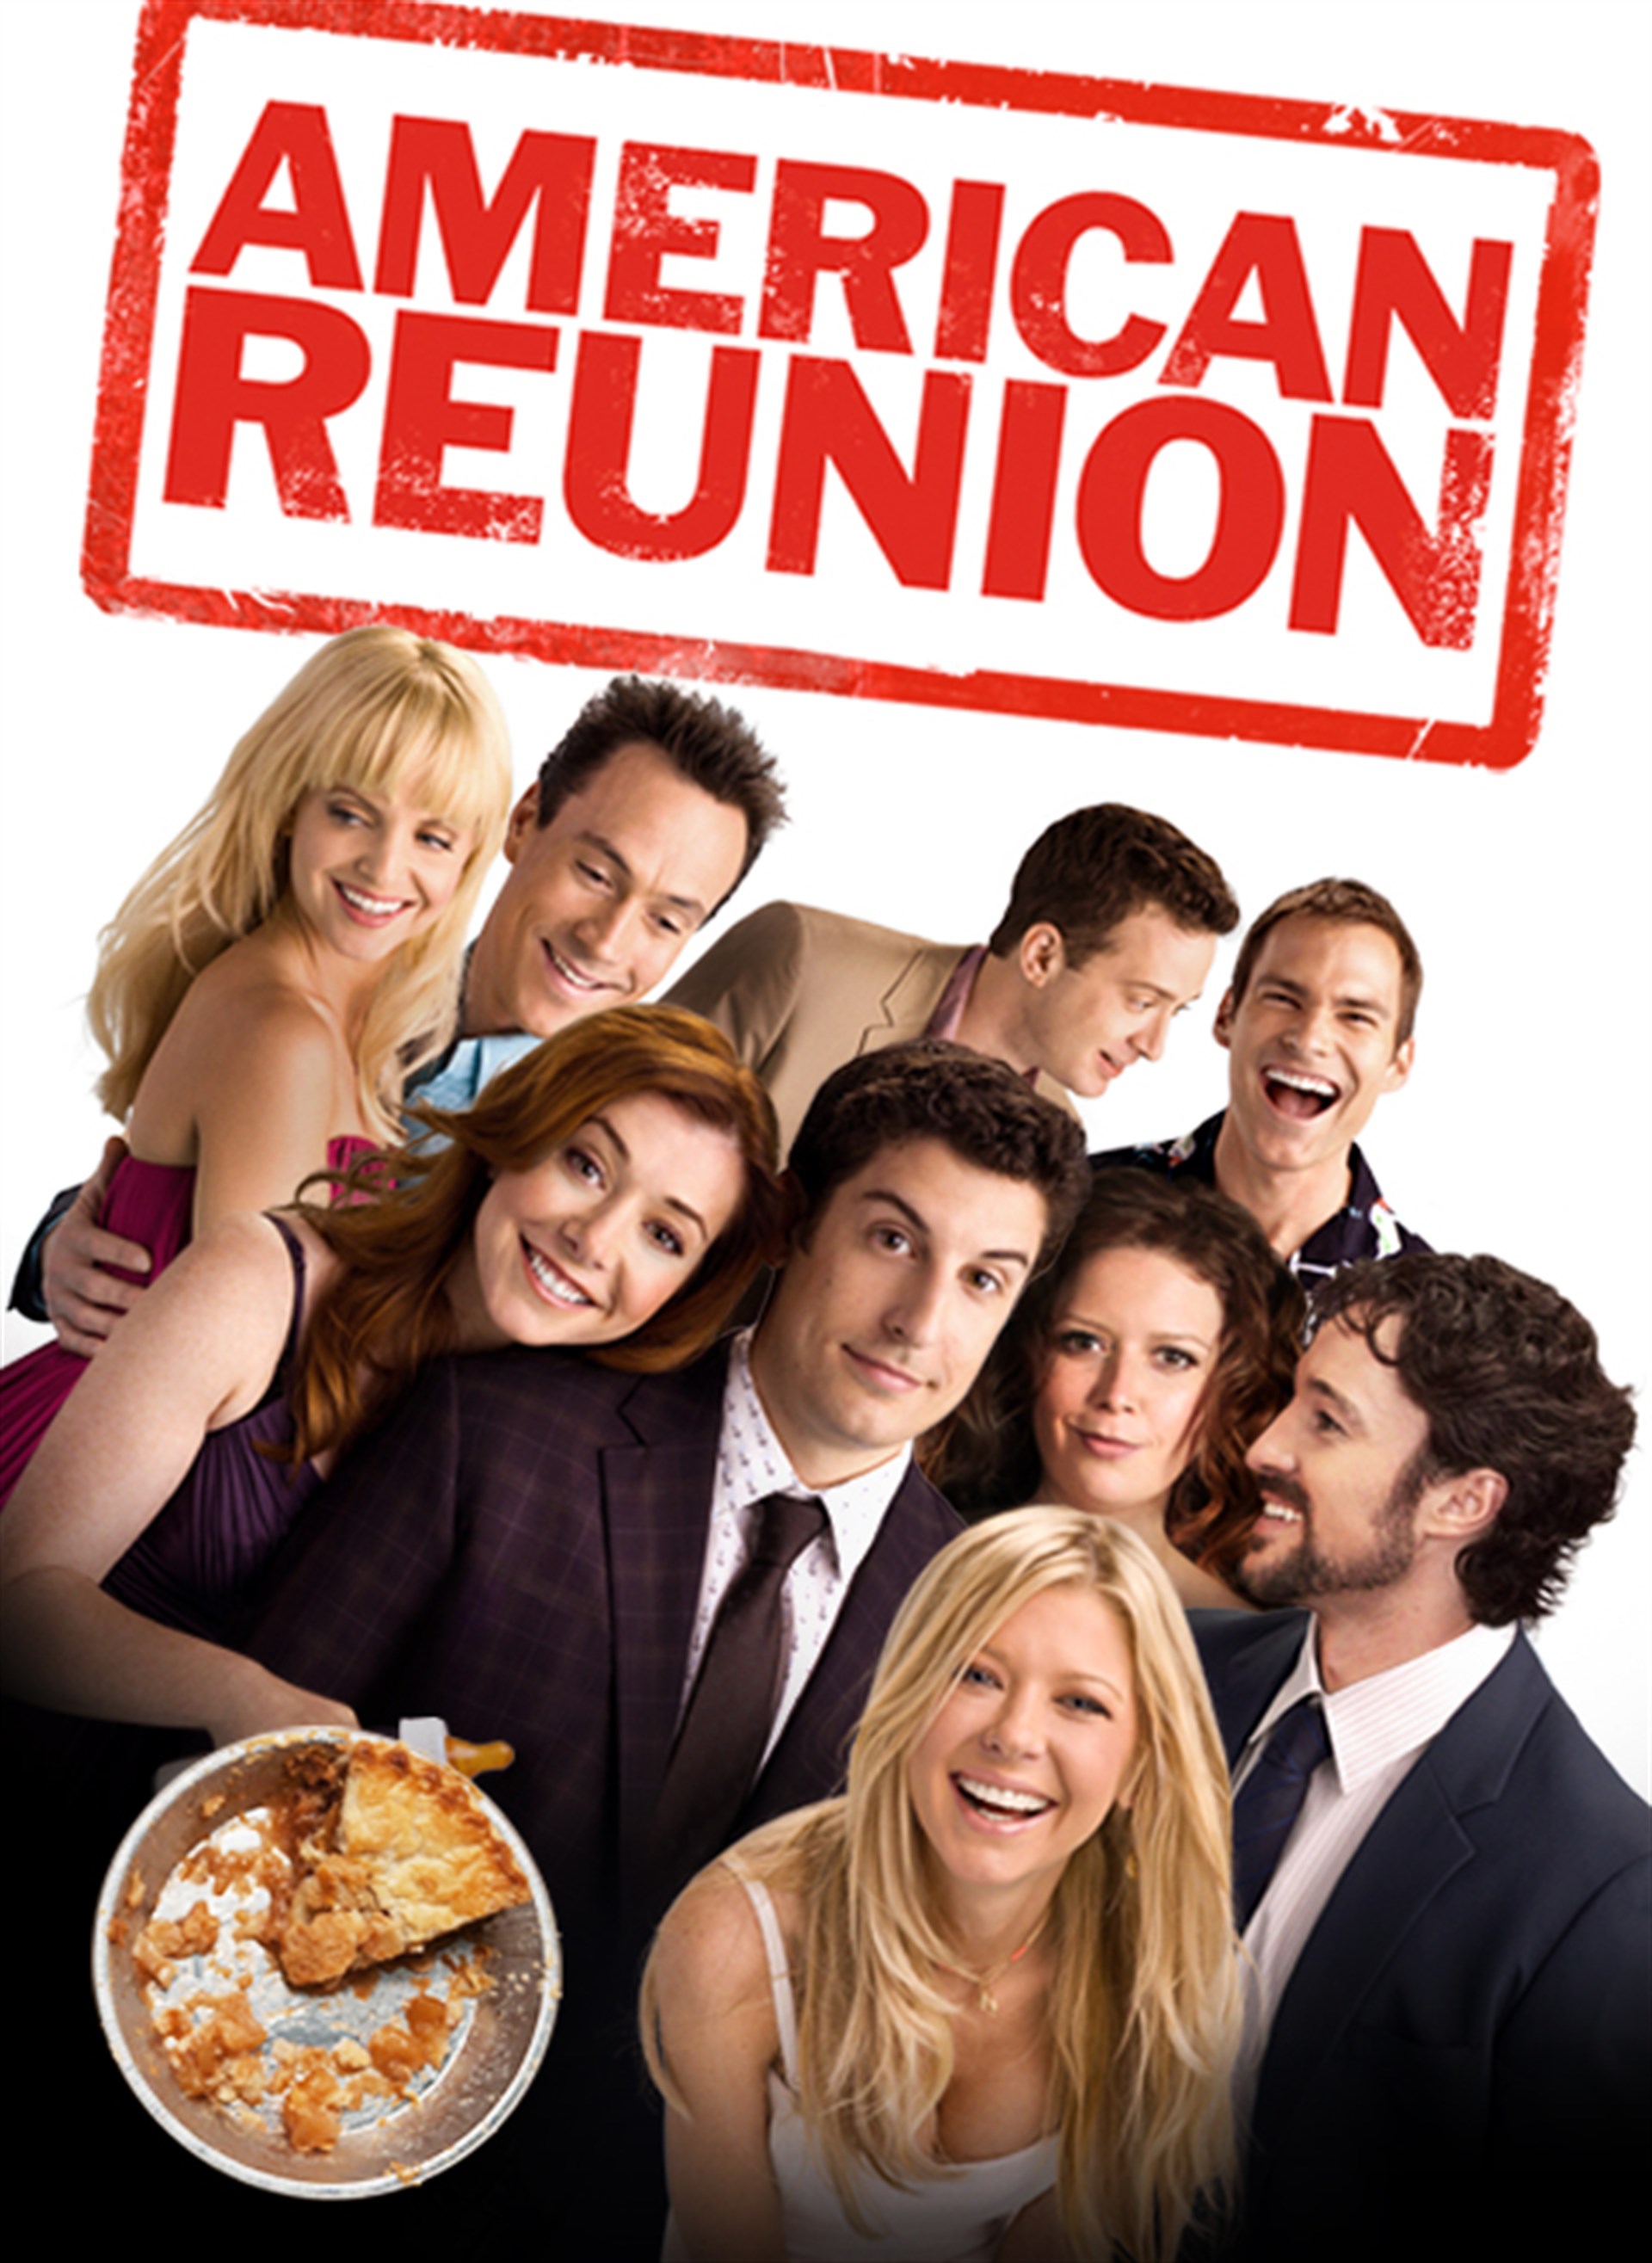 chris scinto recommends American Pie Reunion Full Movie